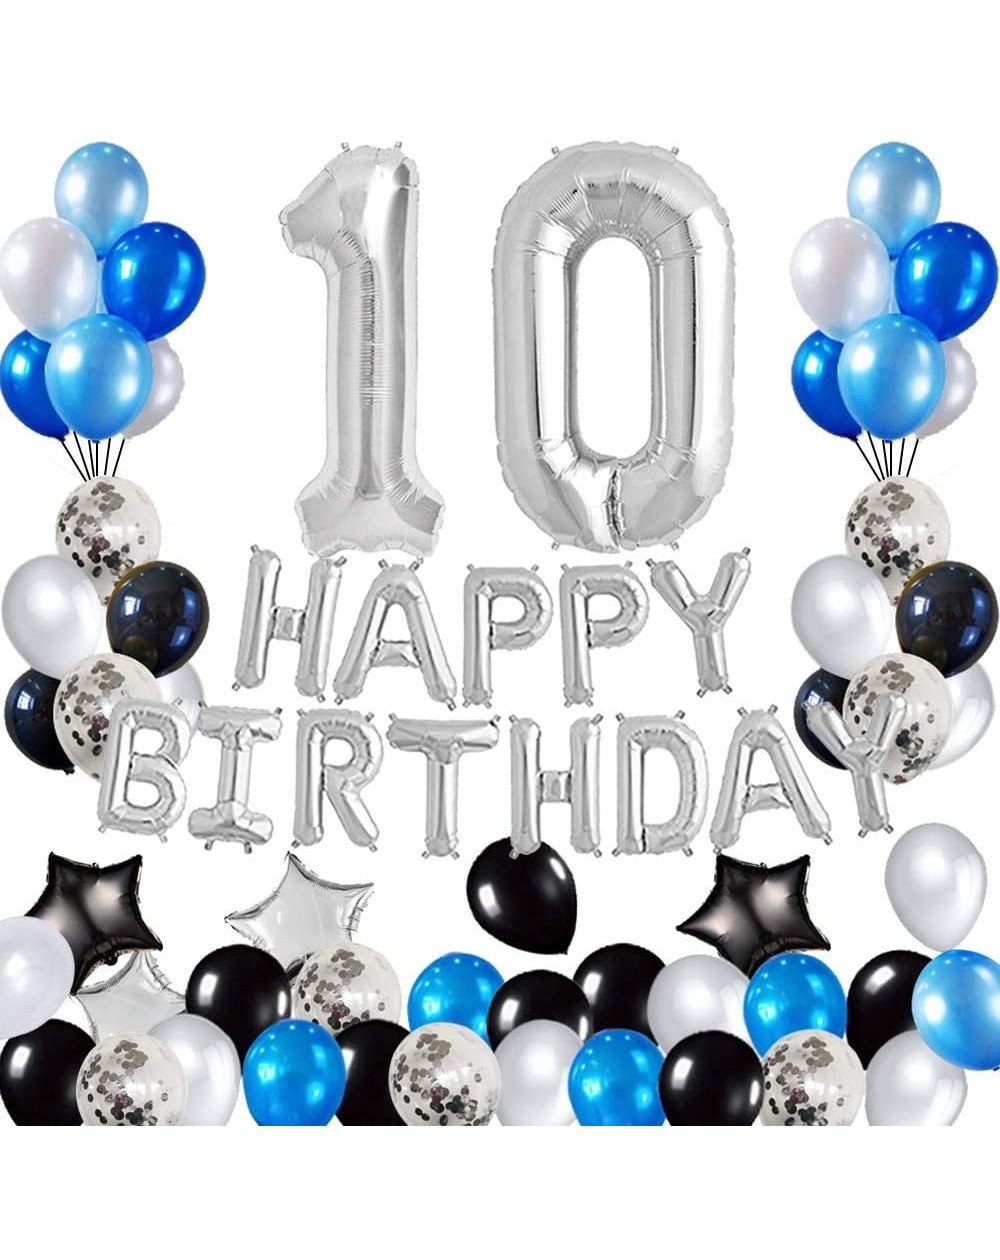 Balloons 10th birthday Decorations Birthday Party Supplies Set- Foil Happy Birthday Banner Foil Balloons Number 10 and Star S...